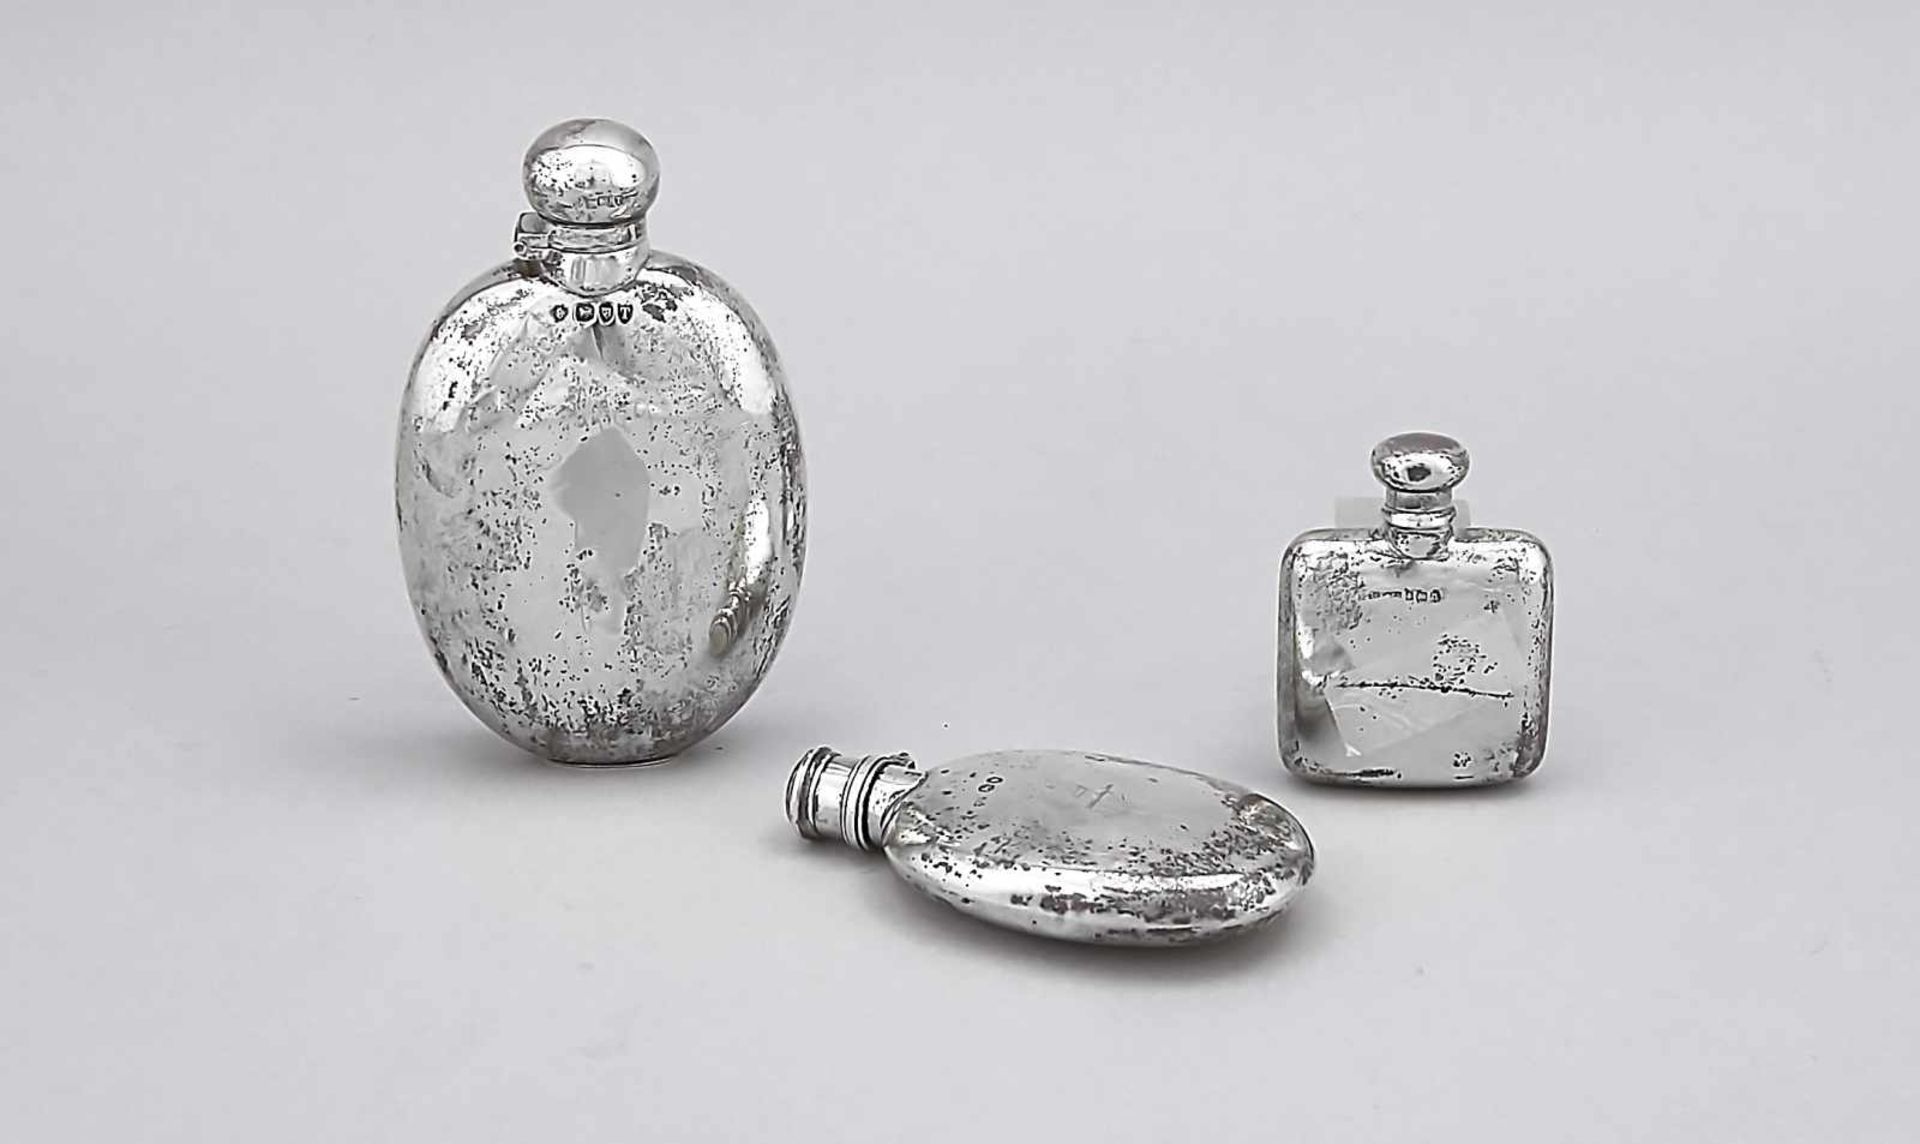 Three flasks, England, 20th cent., Sterling silver 925/000, each flat shape, 2 oval, 1